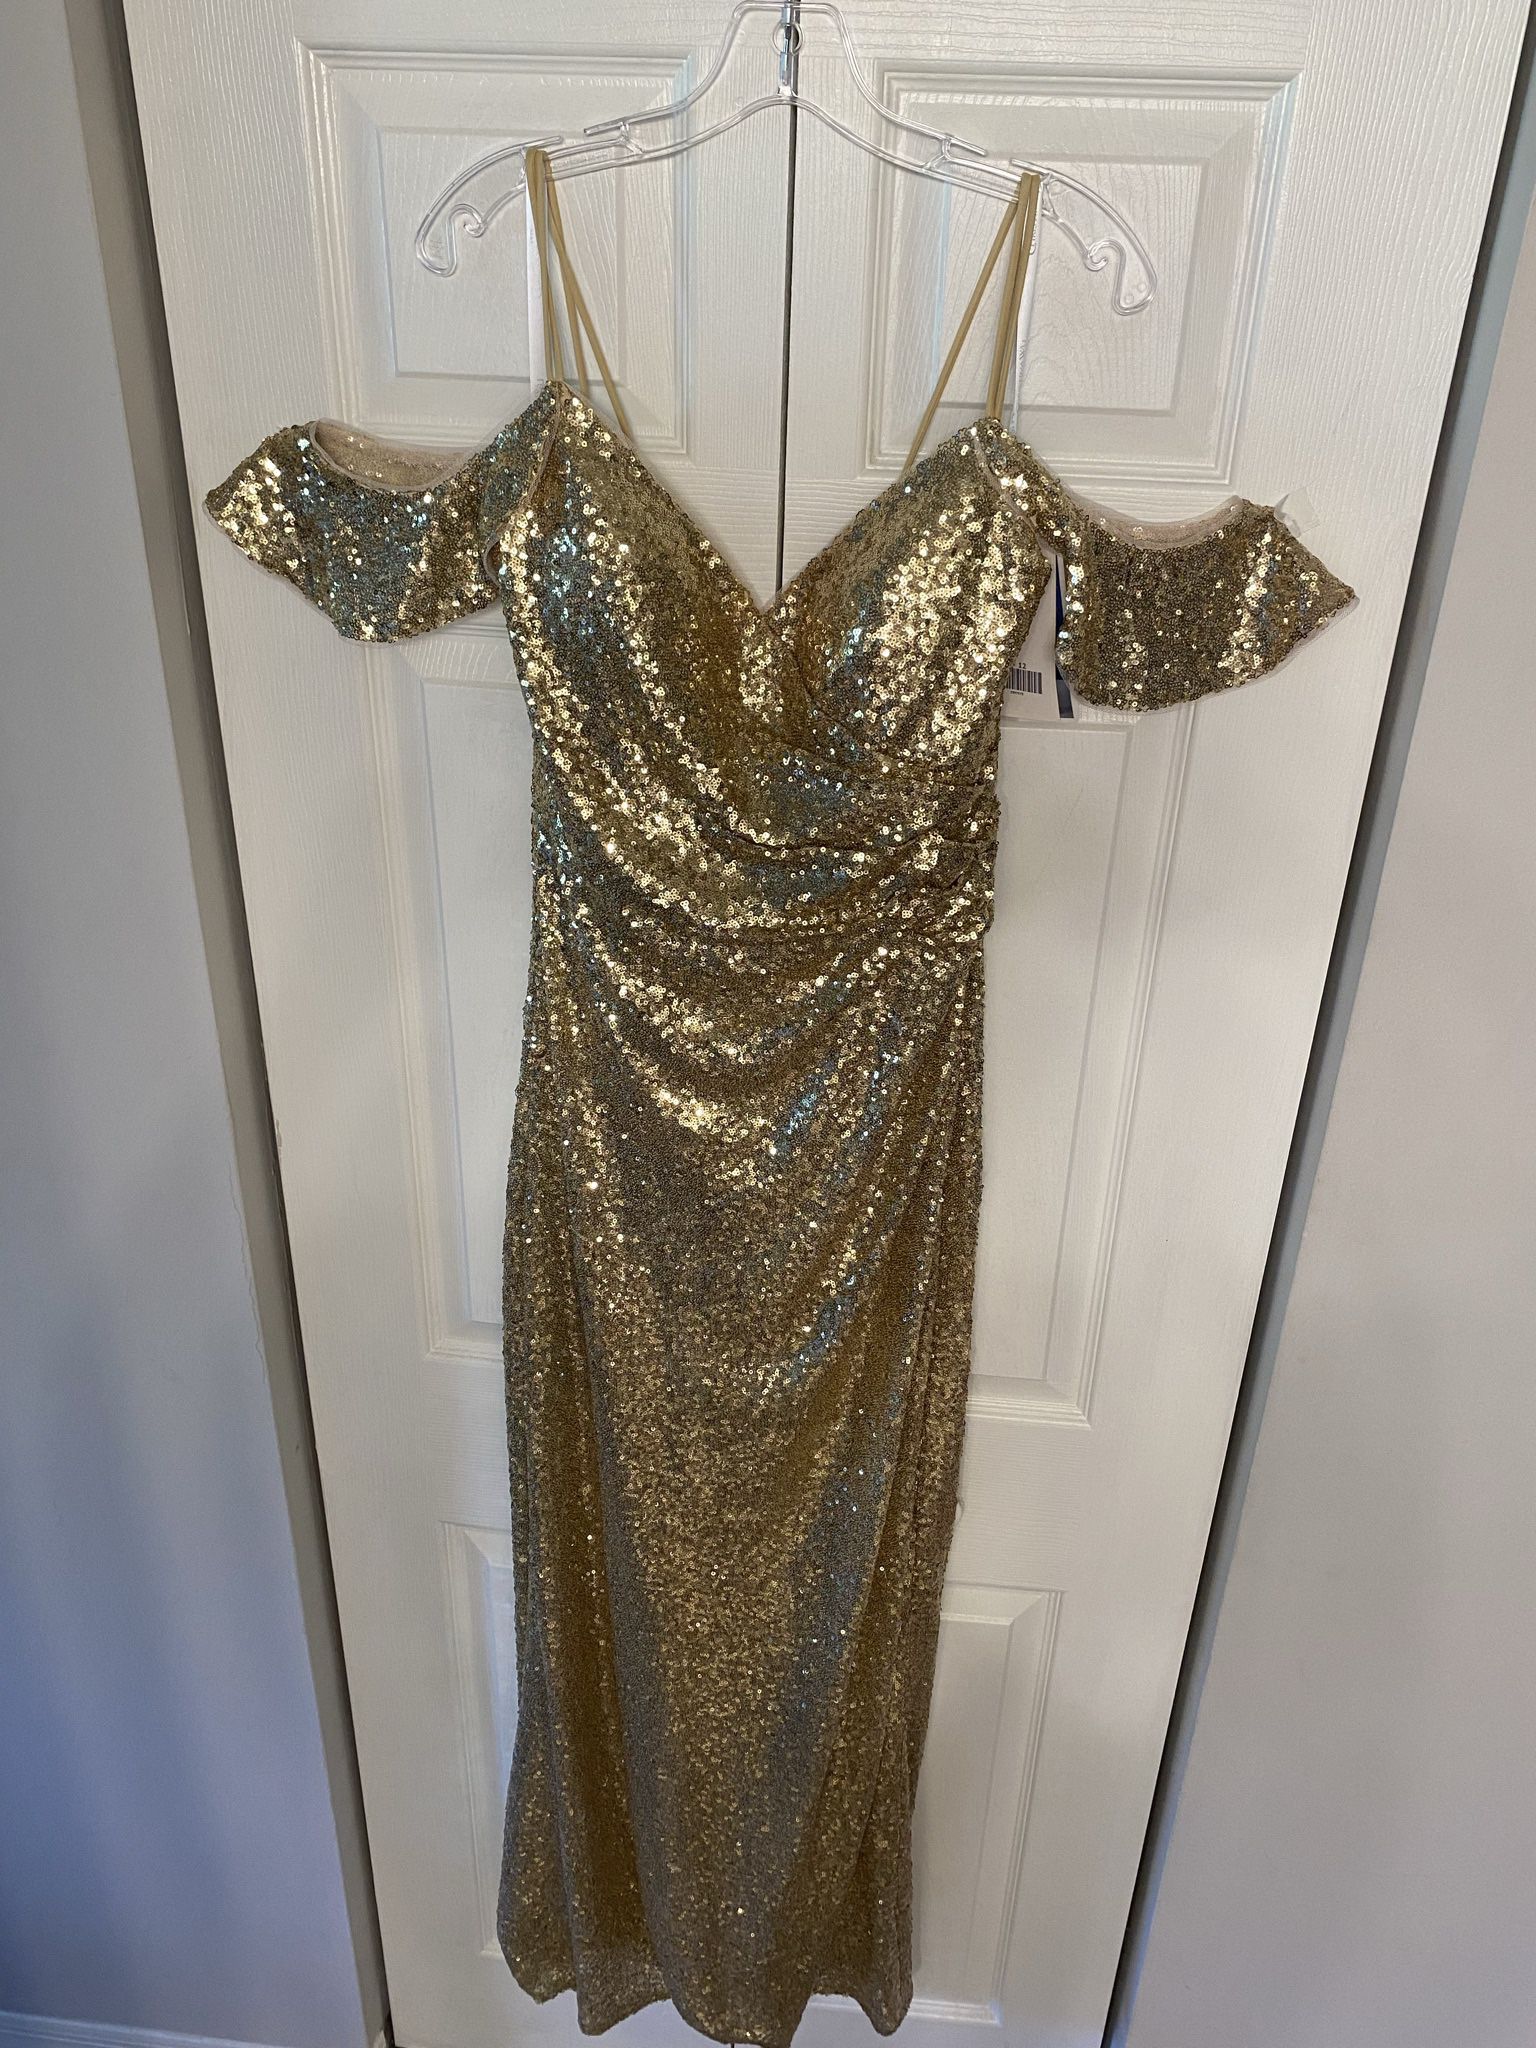 PRICE CUT! 50%off Retail! Gold Sequin Gown Christina Wu